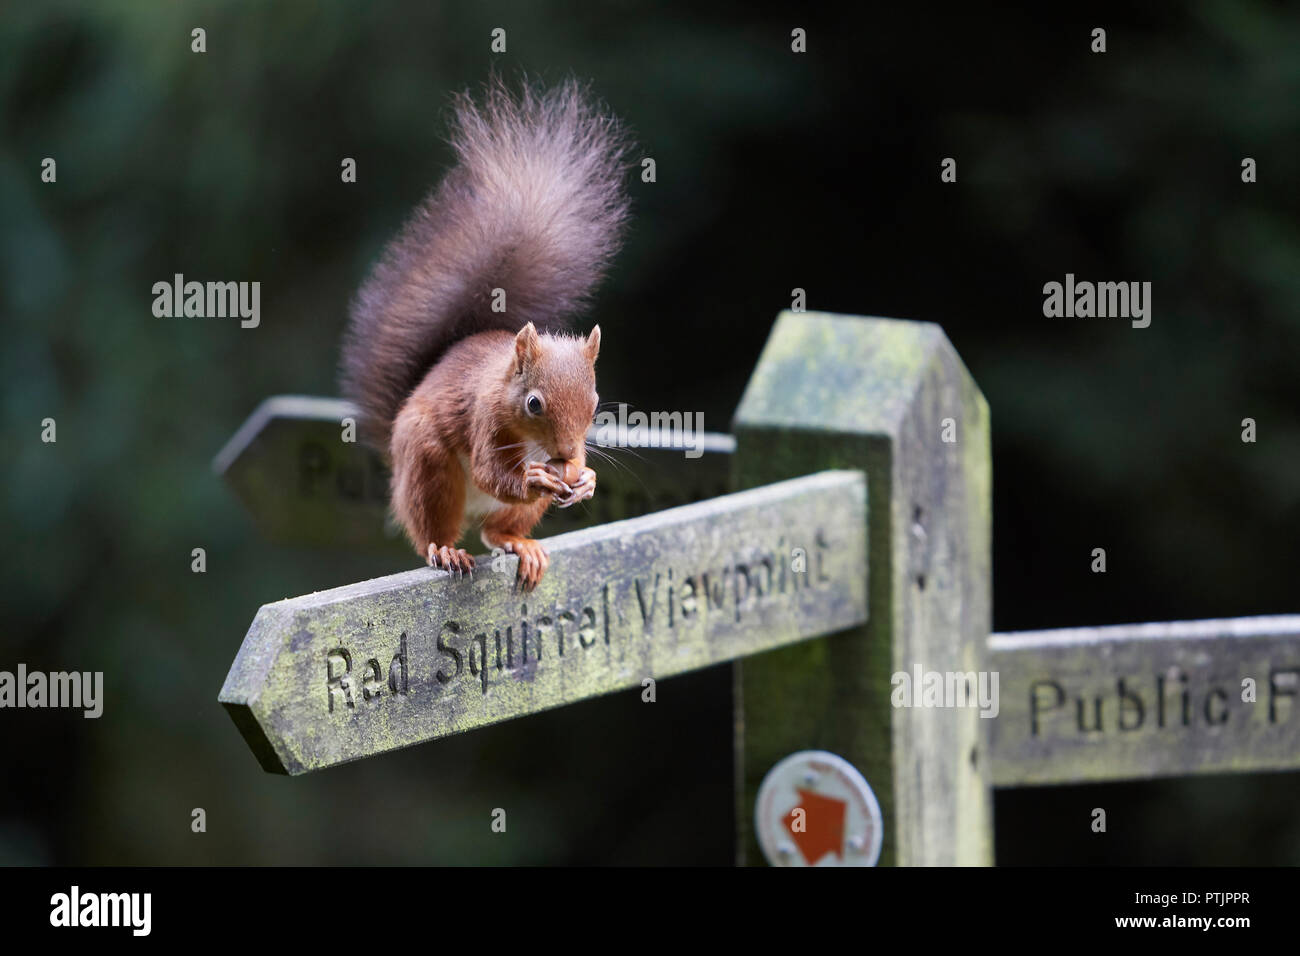 Red Squirrel, Sciurus vulgaris, eating a hazelnut on a Red Squirrel viewpoint public footpath sign post, Snaizeholme, near Hawes, Yorkshire Dales Nati Stock Photo